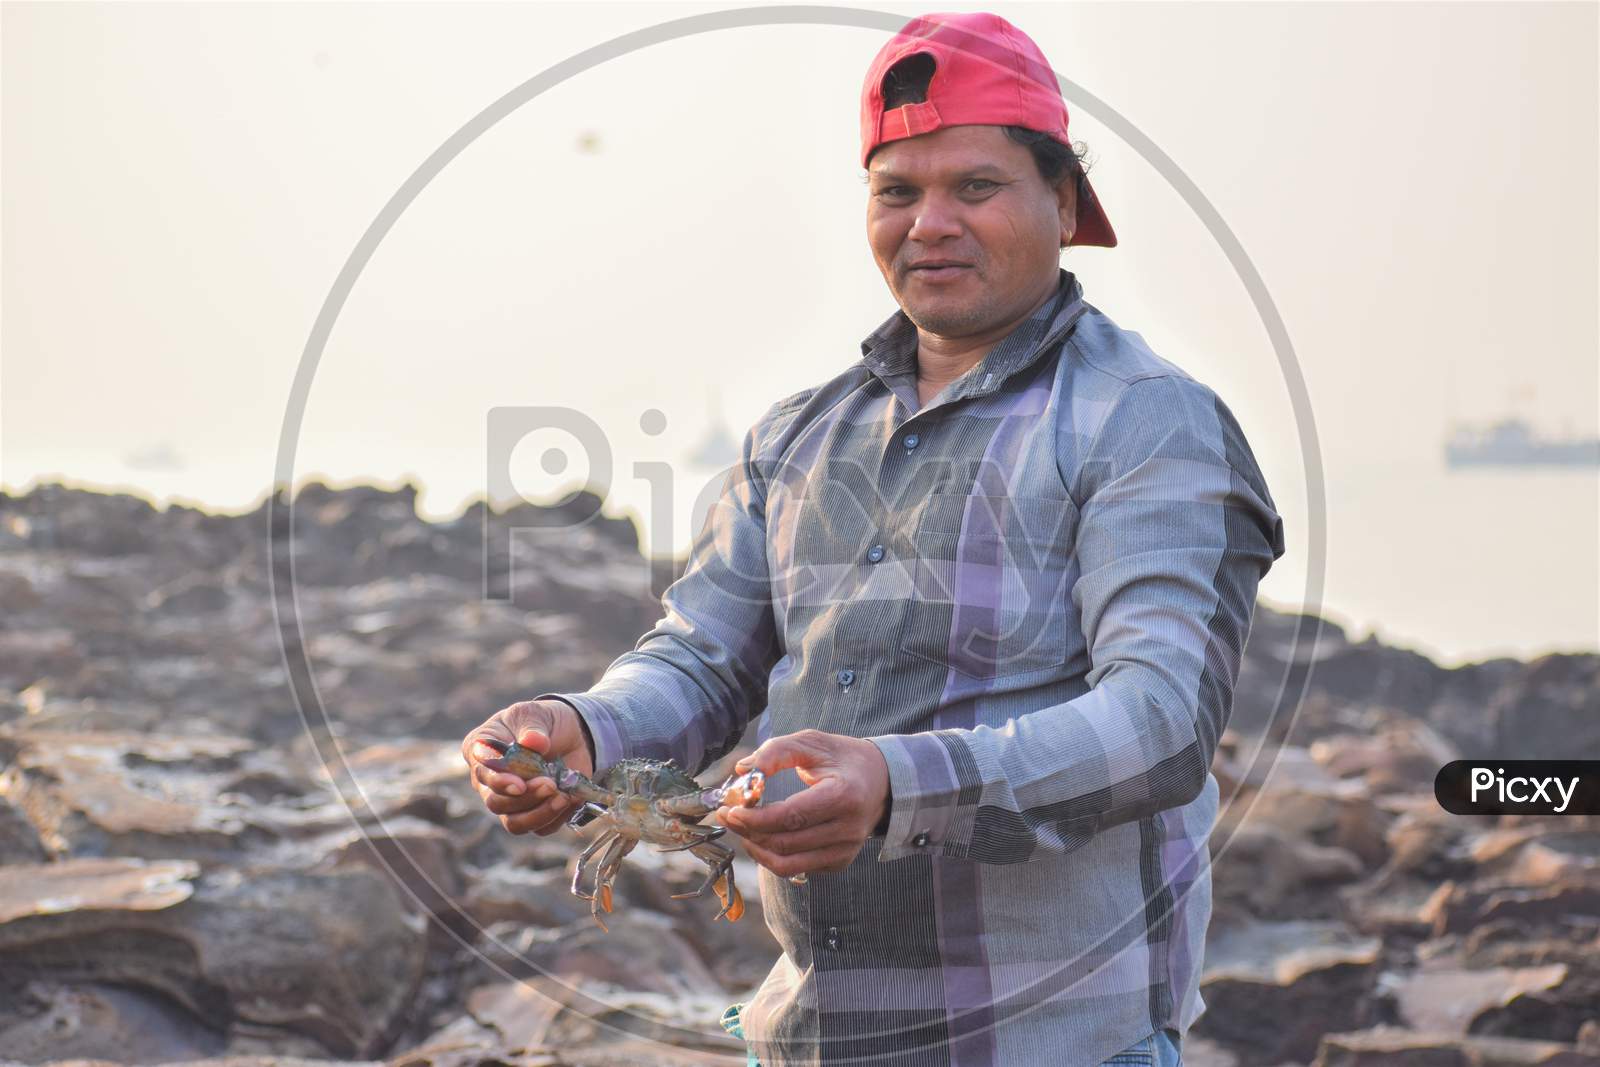 Fisherman Holding Giant Crab In His Hand At Sea Shore With Smile On His Face